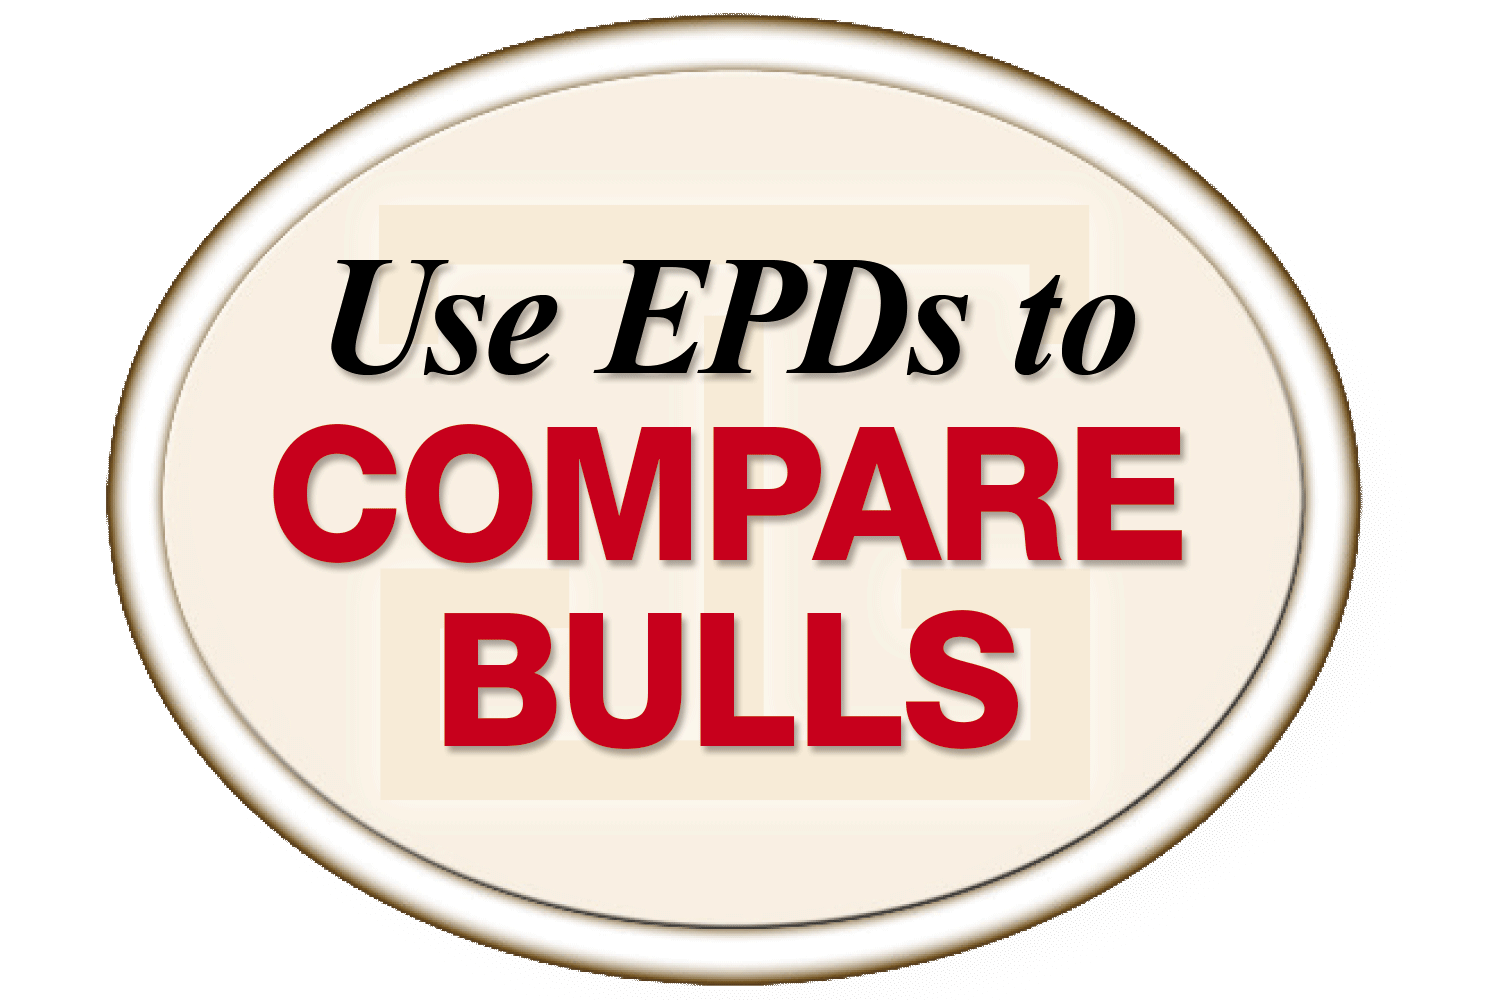 Use EPDs to Compare Bulls